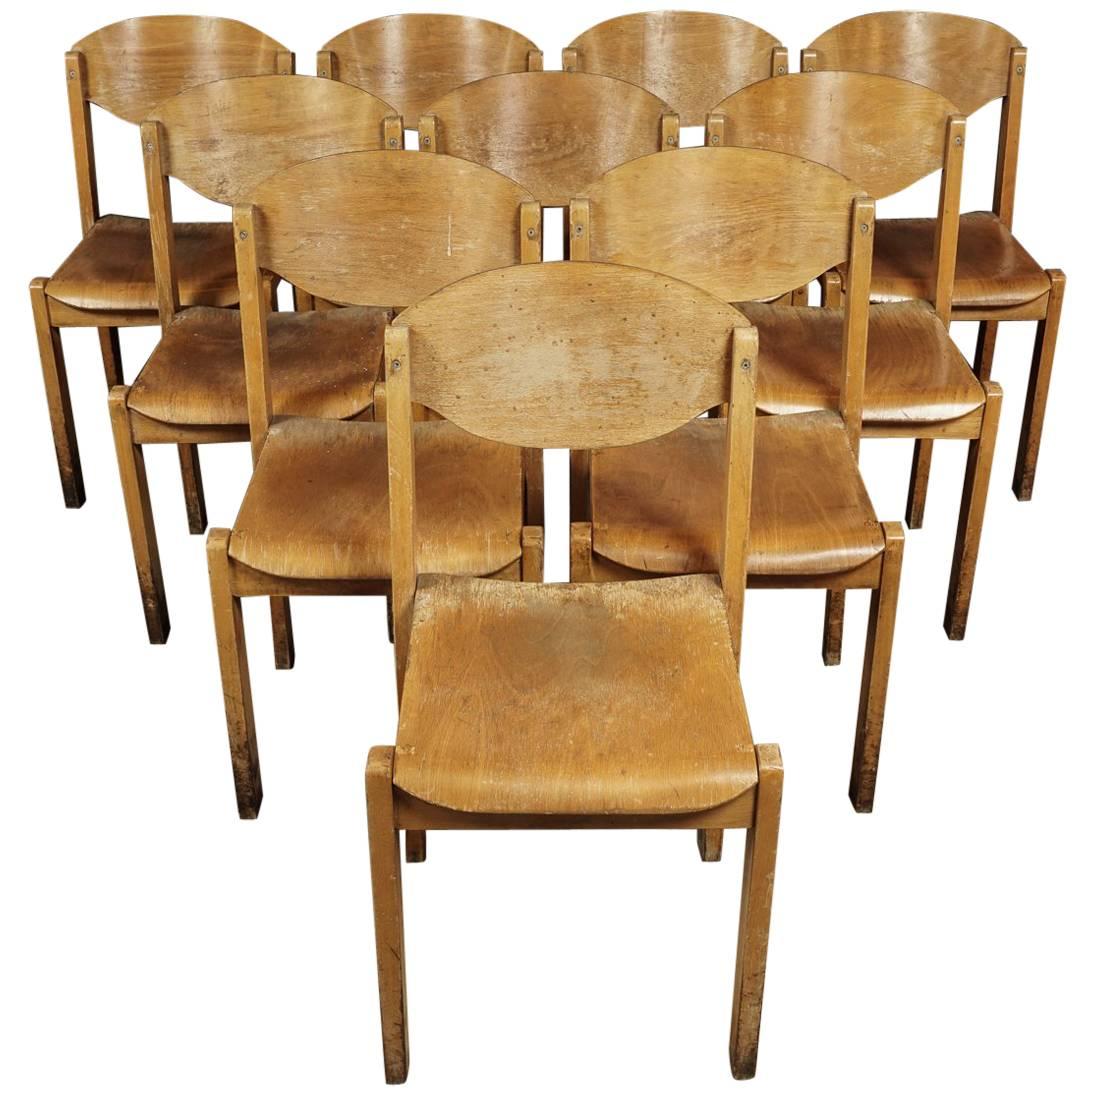 Set of Ten Stacking Chairs from a University in France, circa 1960